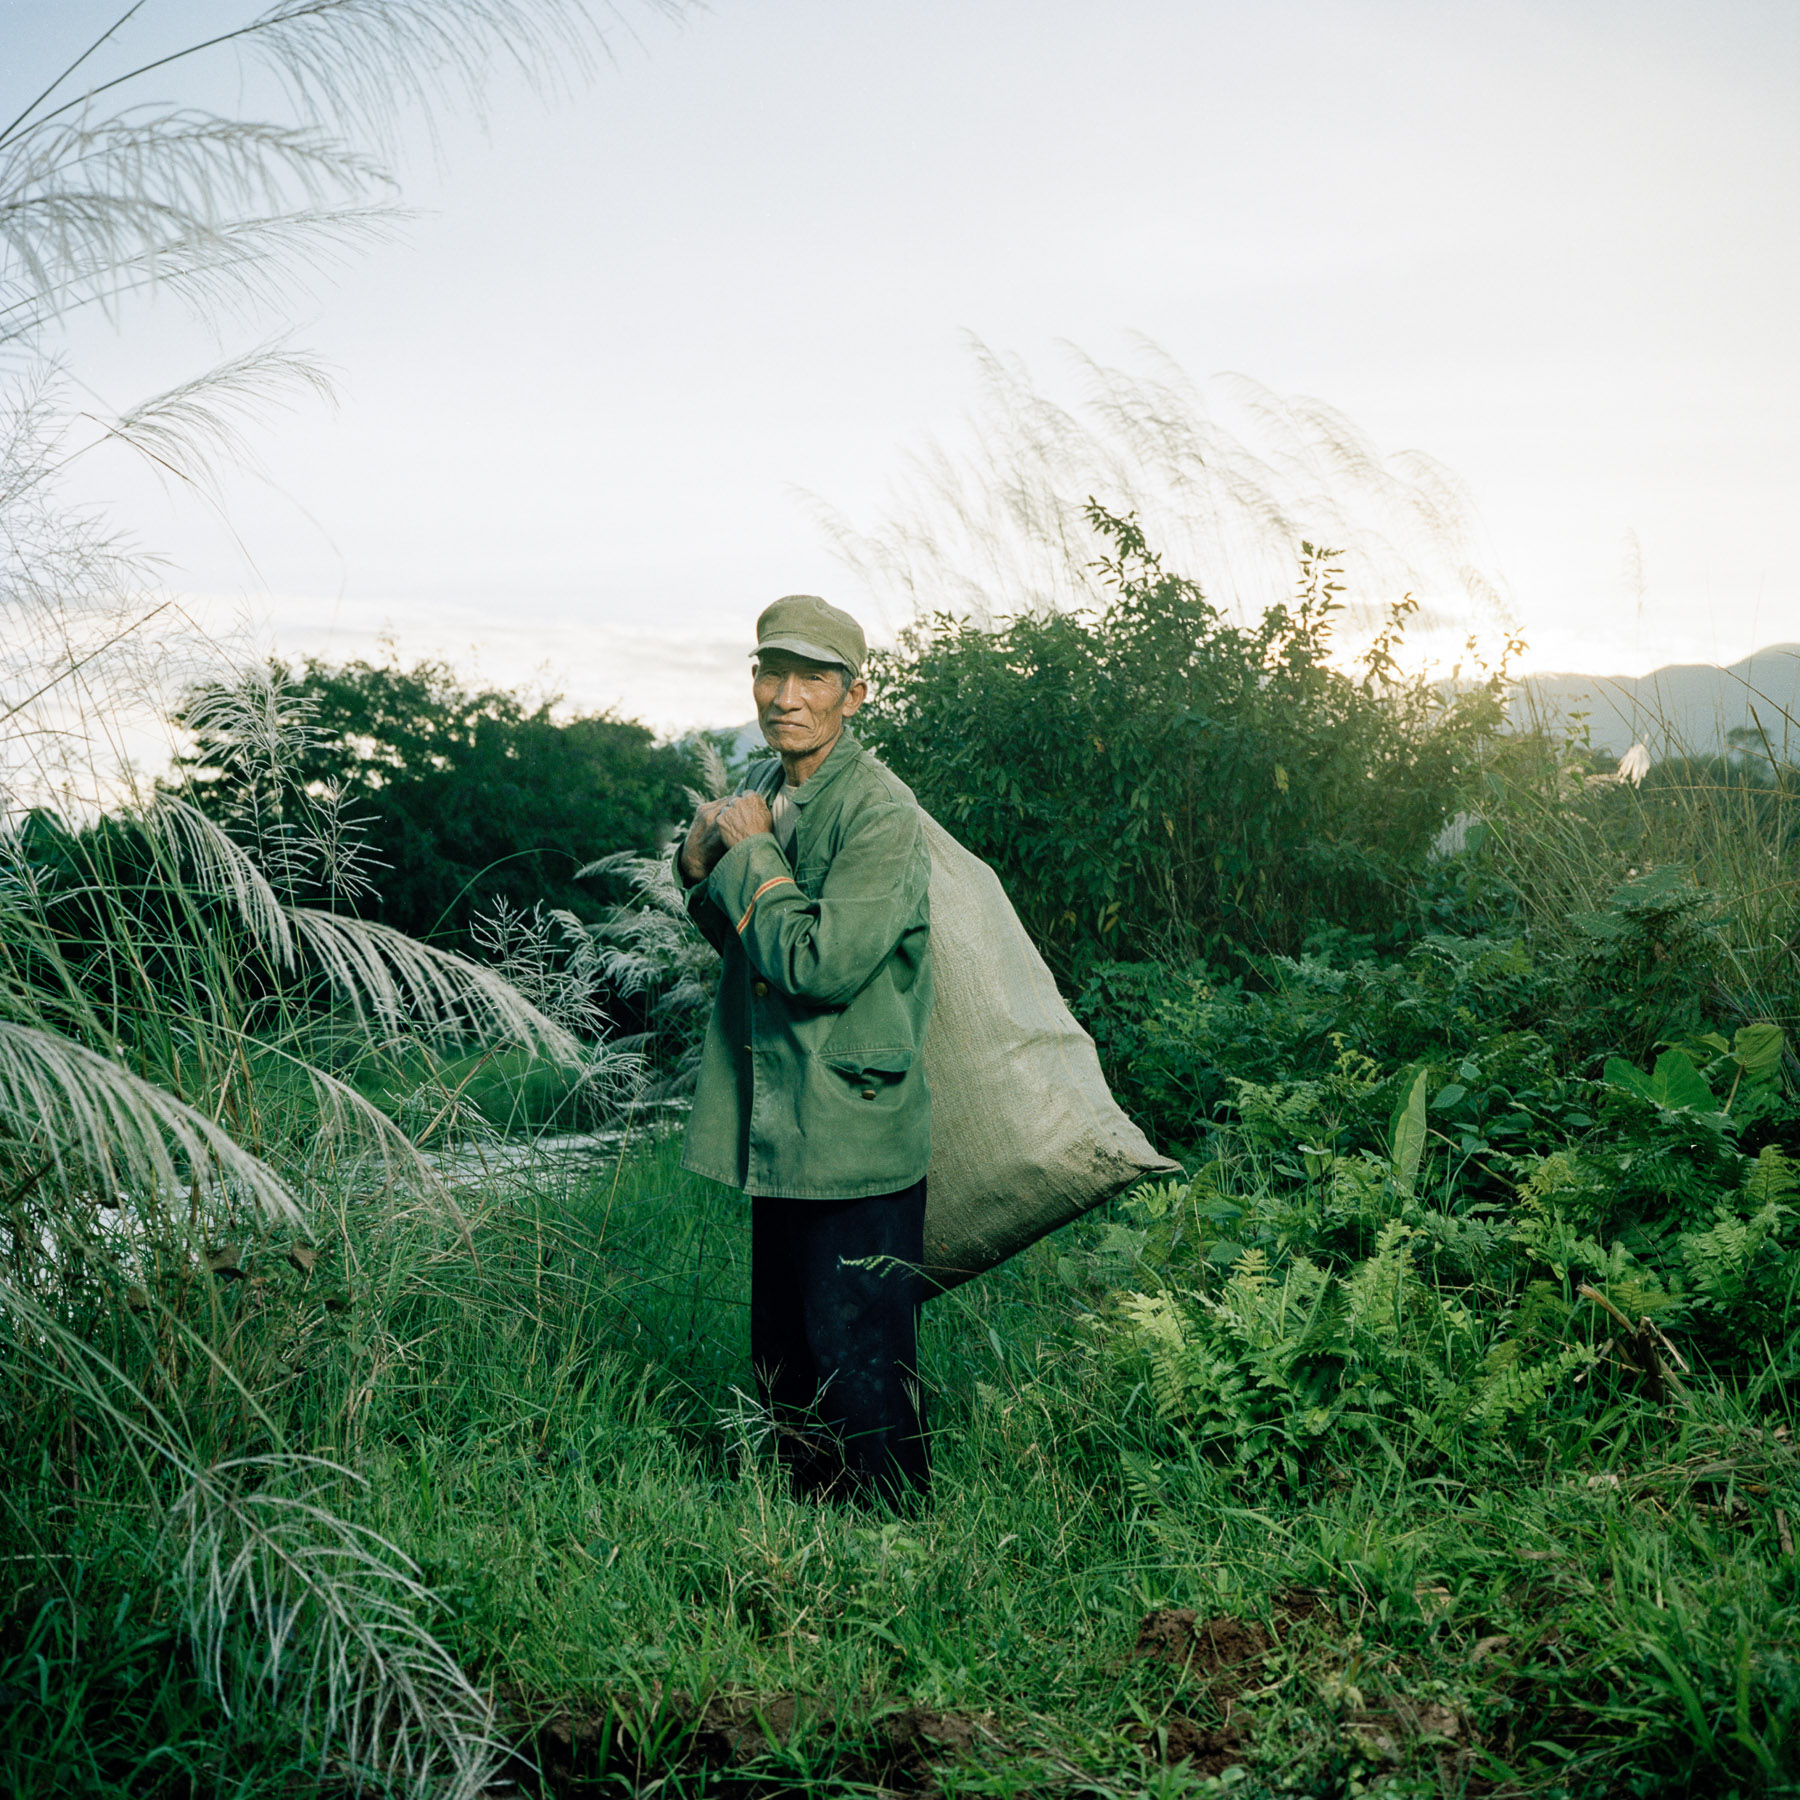  China, Yunnan province. Southern region of Xishuangbanna. Old Dai Minority man pictured coming back from a day's harvesting. 